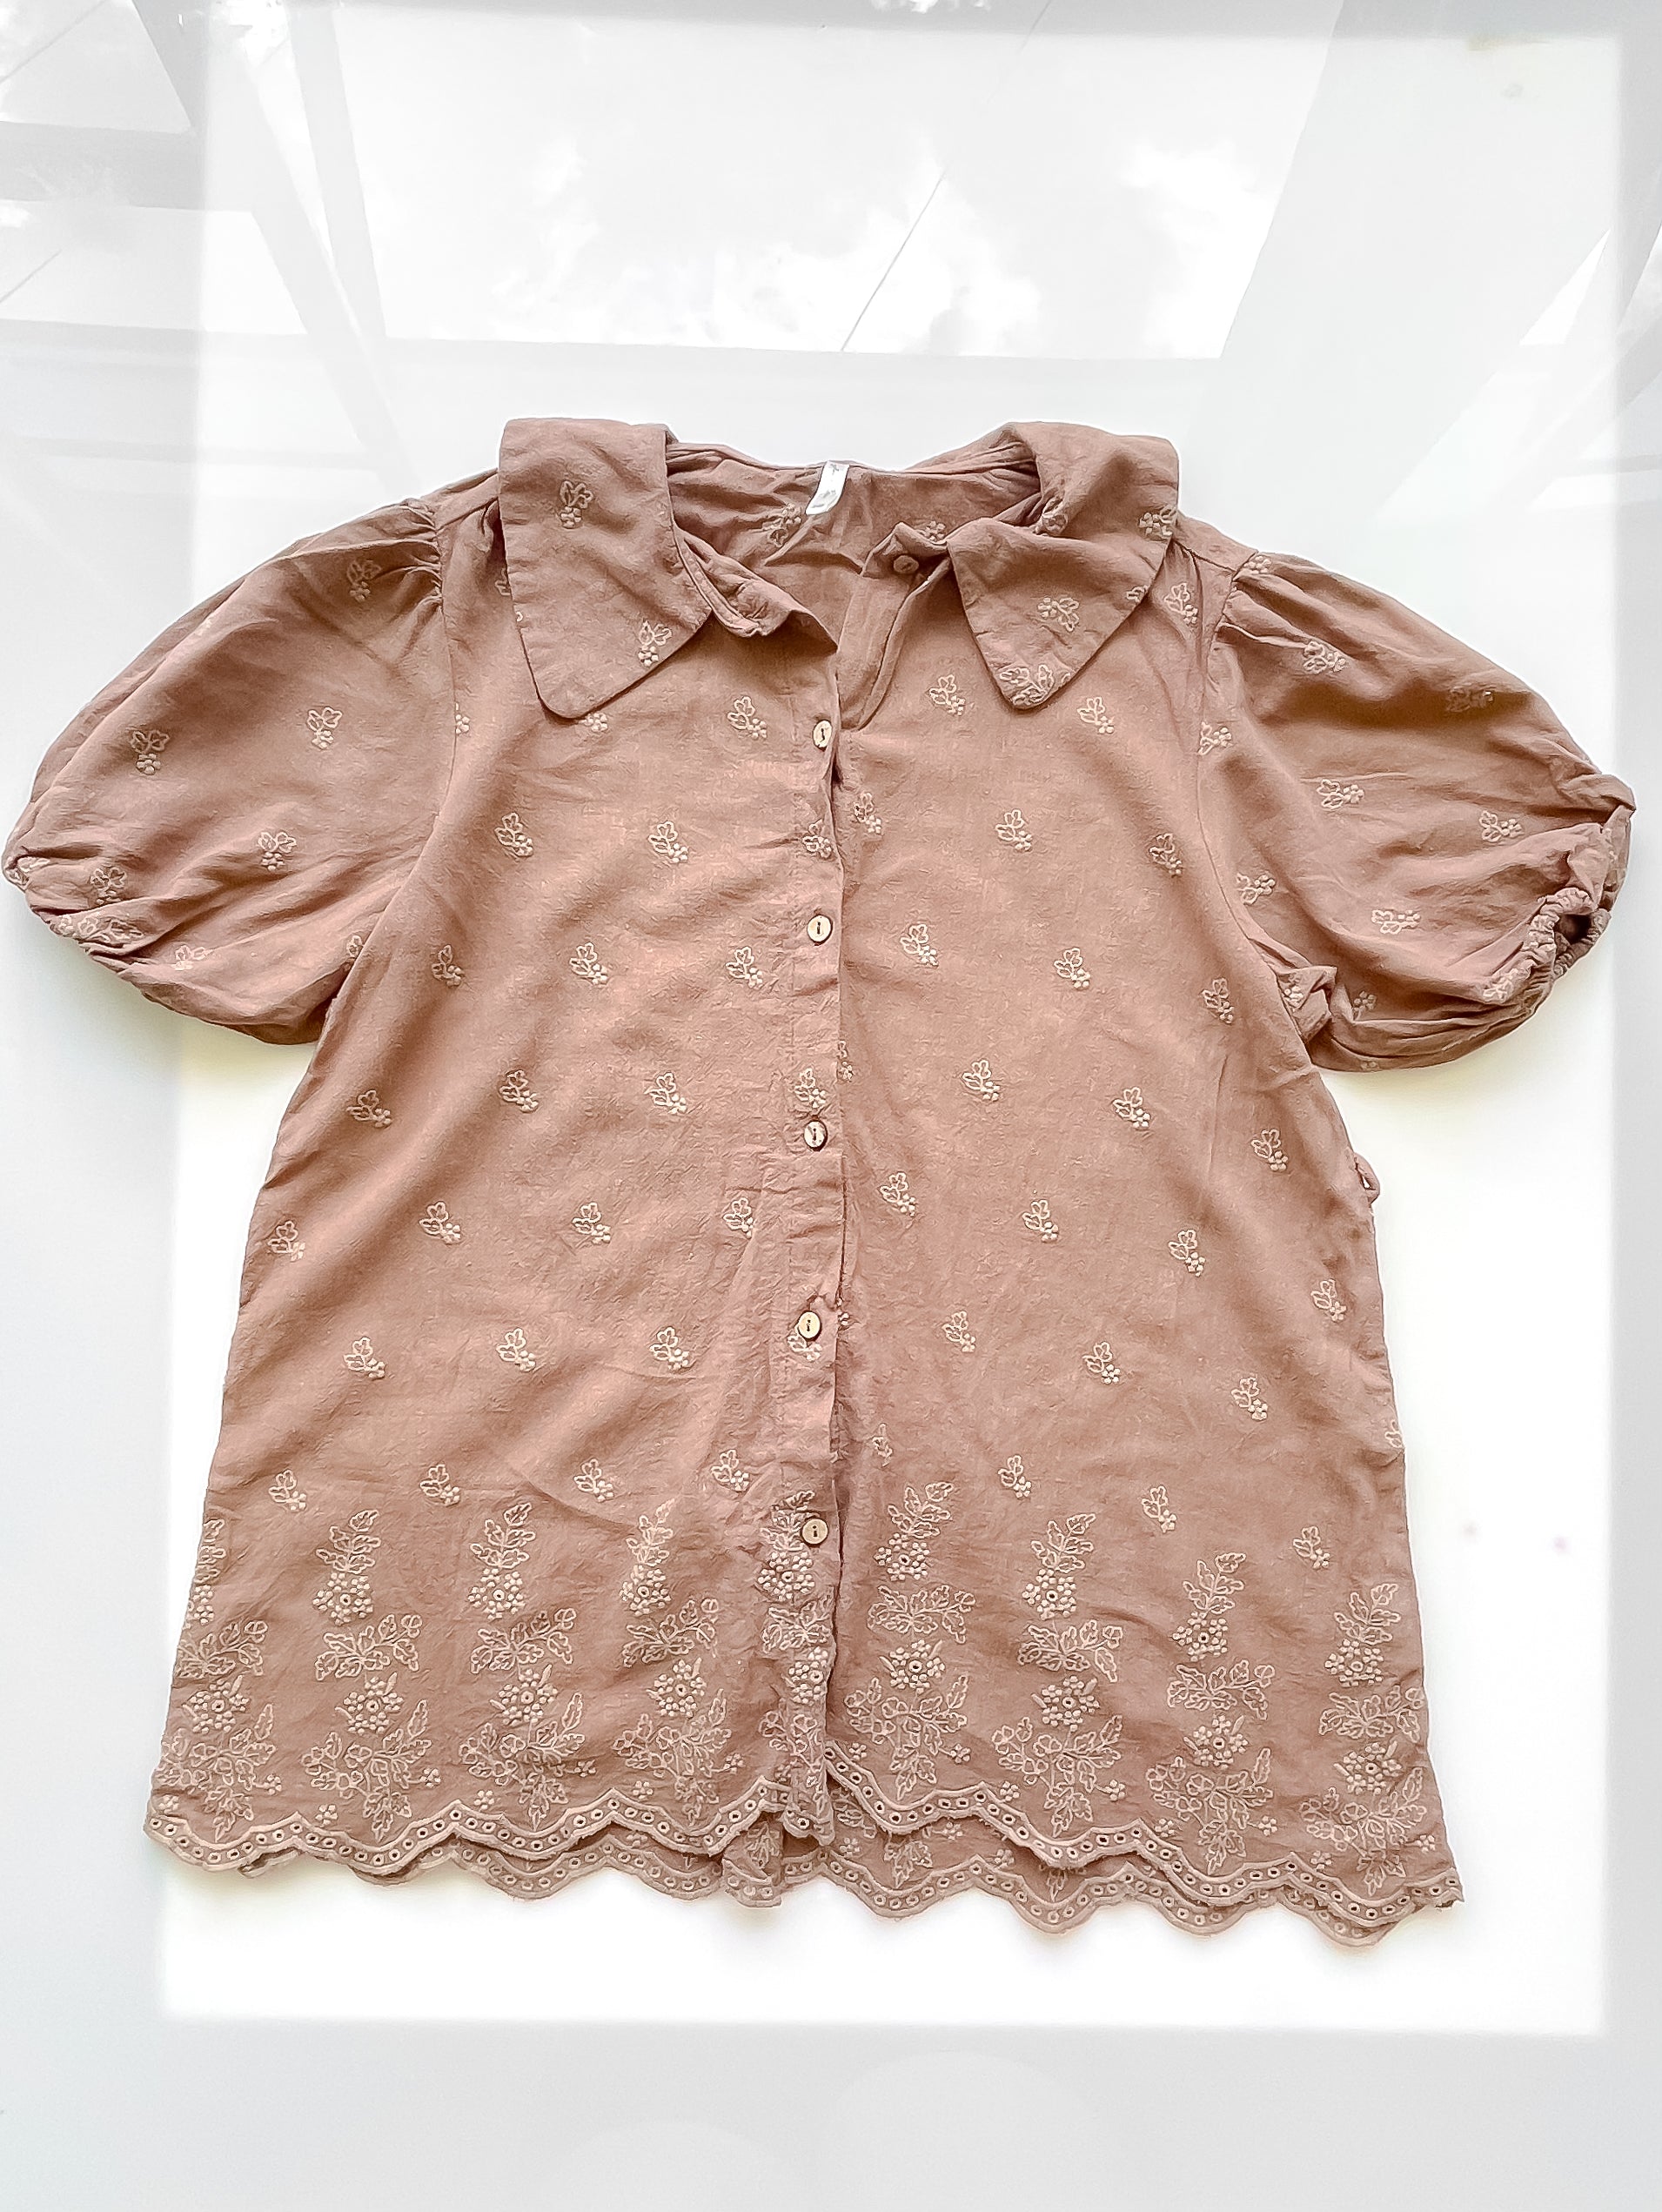 Rylee + Cru linen olive dress - grapevine embroidery (6-7y)